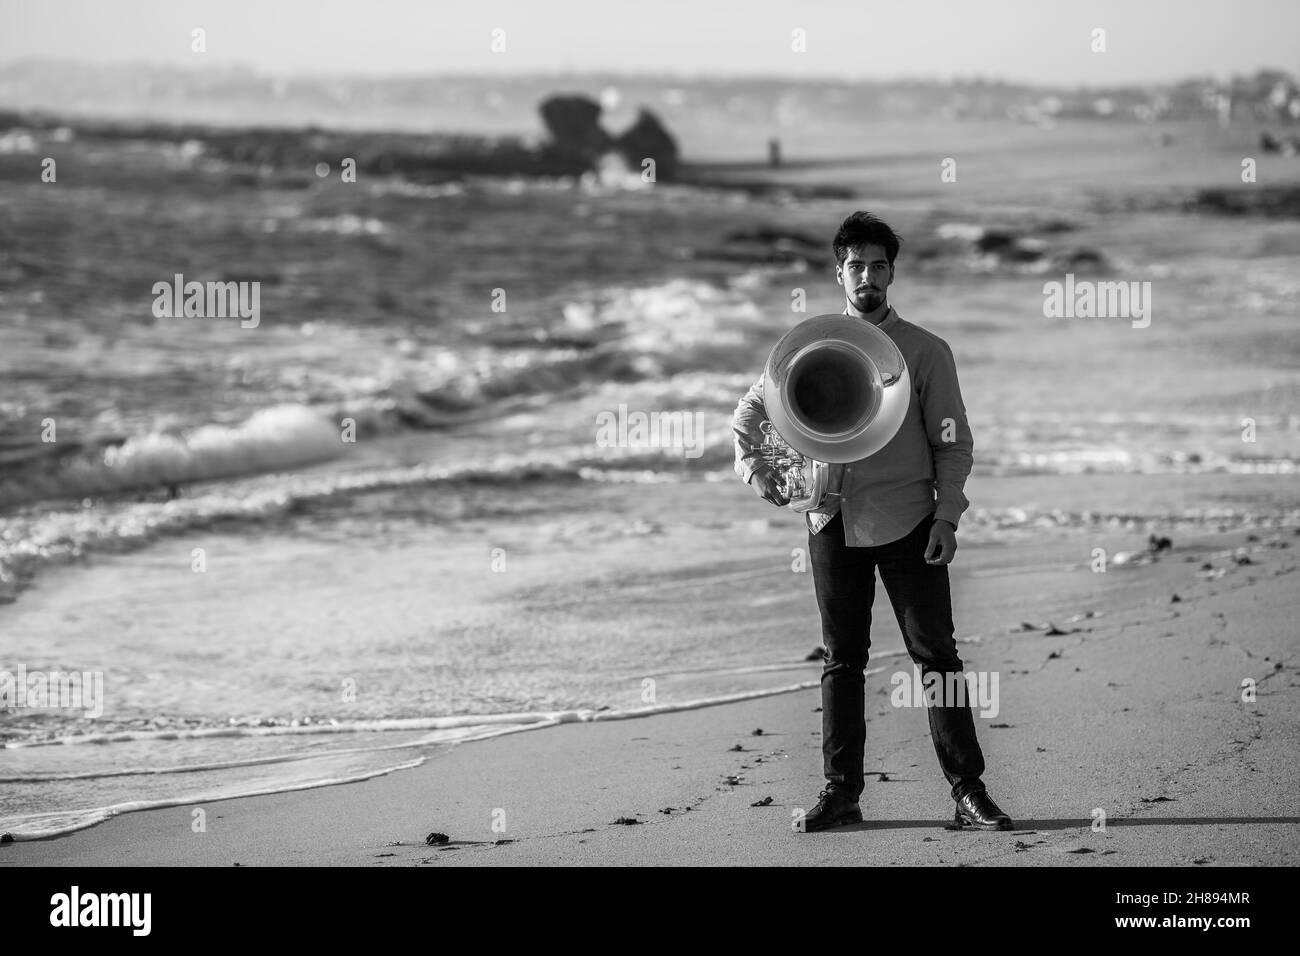 Musician standing with a tuba near the ocean shore. Black and white photo. Stock Photo